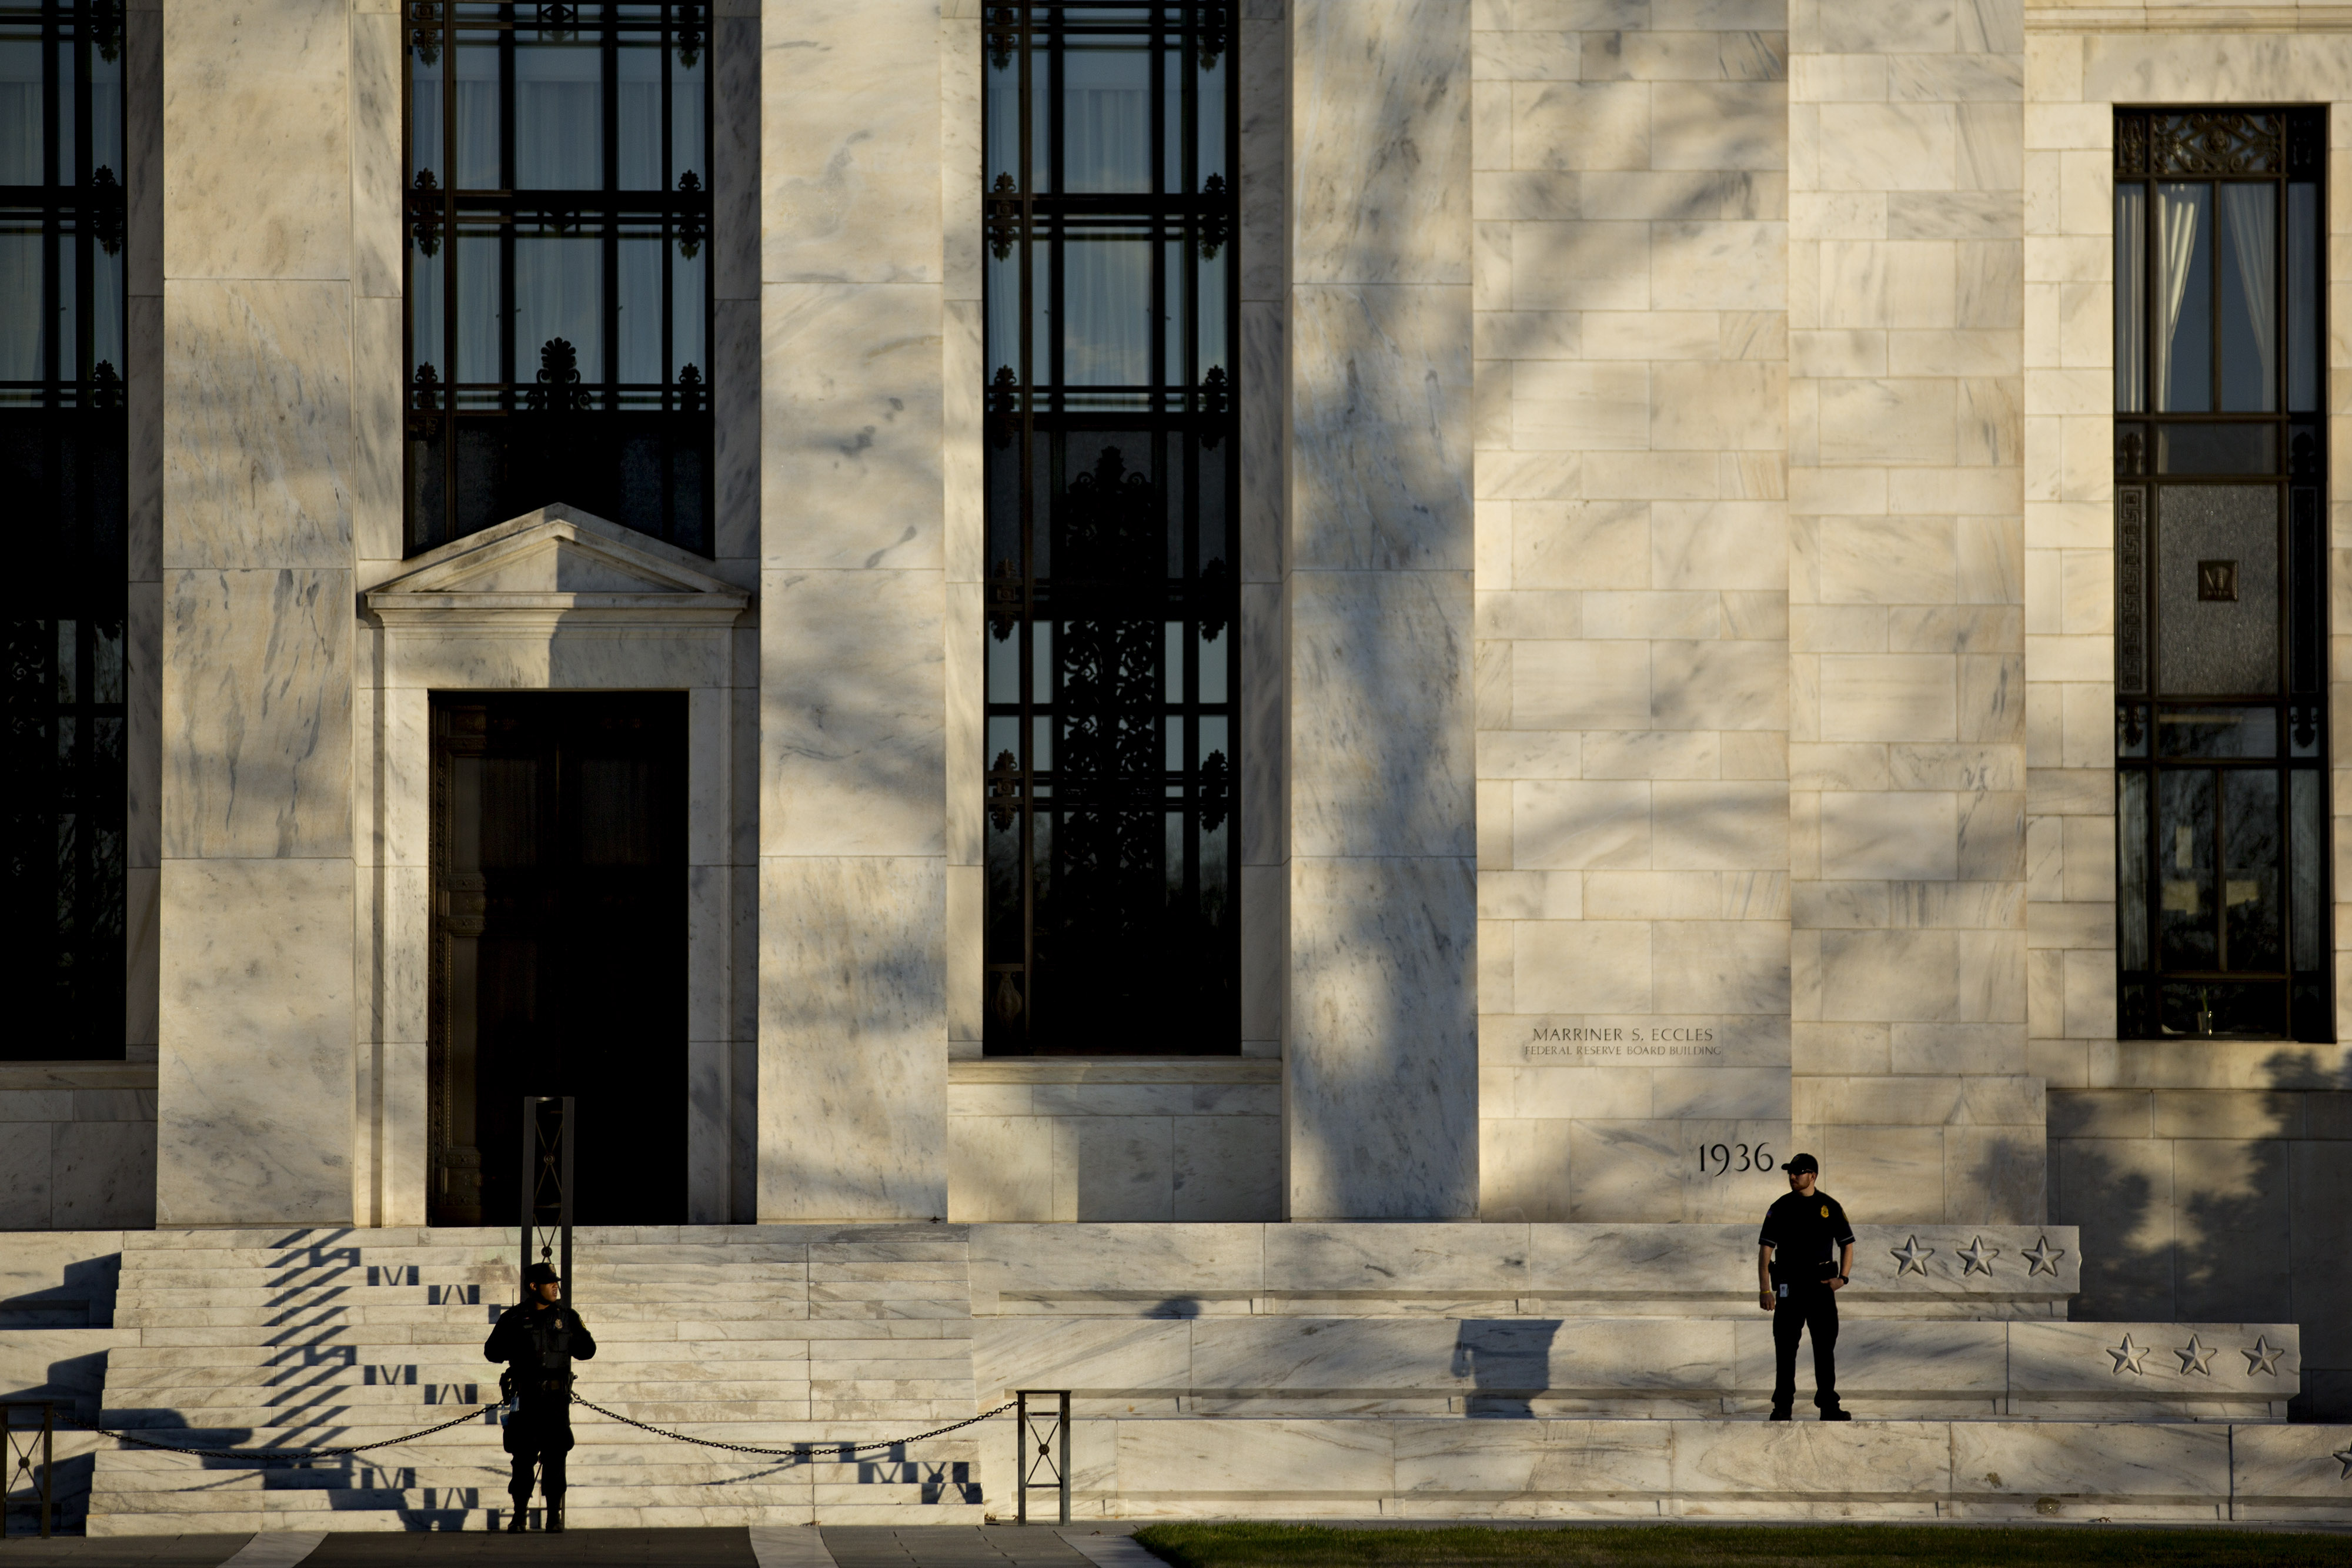 Federal Reserve police officers stand in front of the Marriner S. Eccles Federal Reserve building in Washington, D.C., on Dec. 15, 2015.